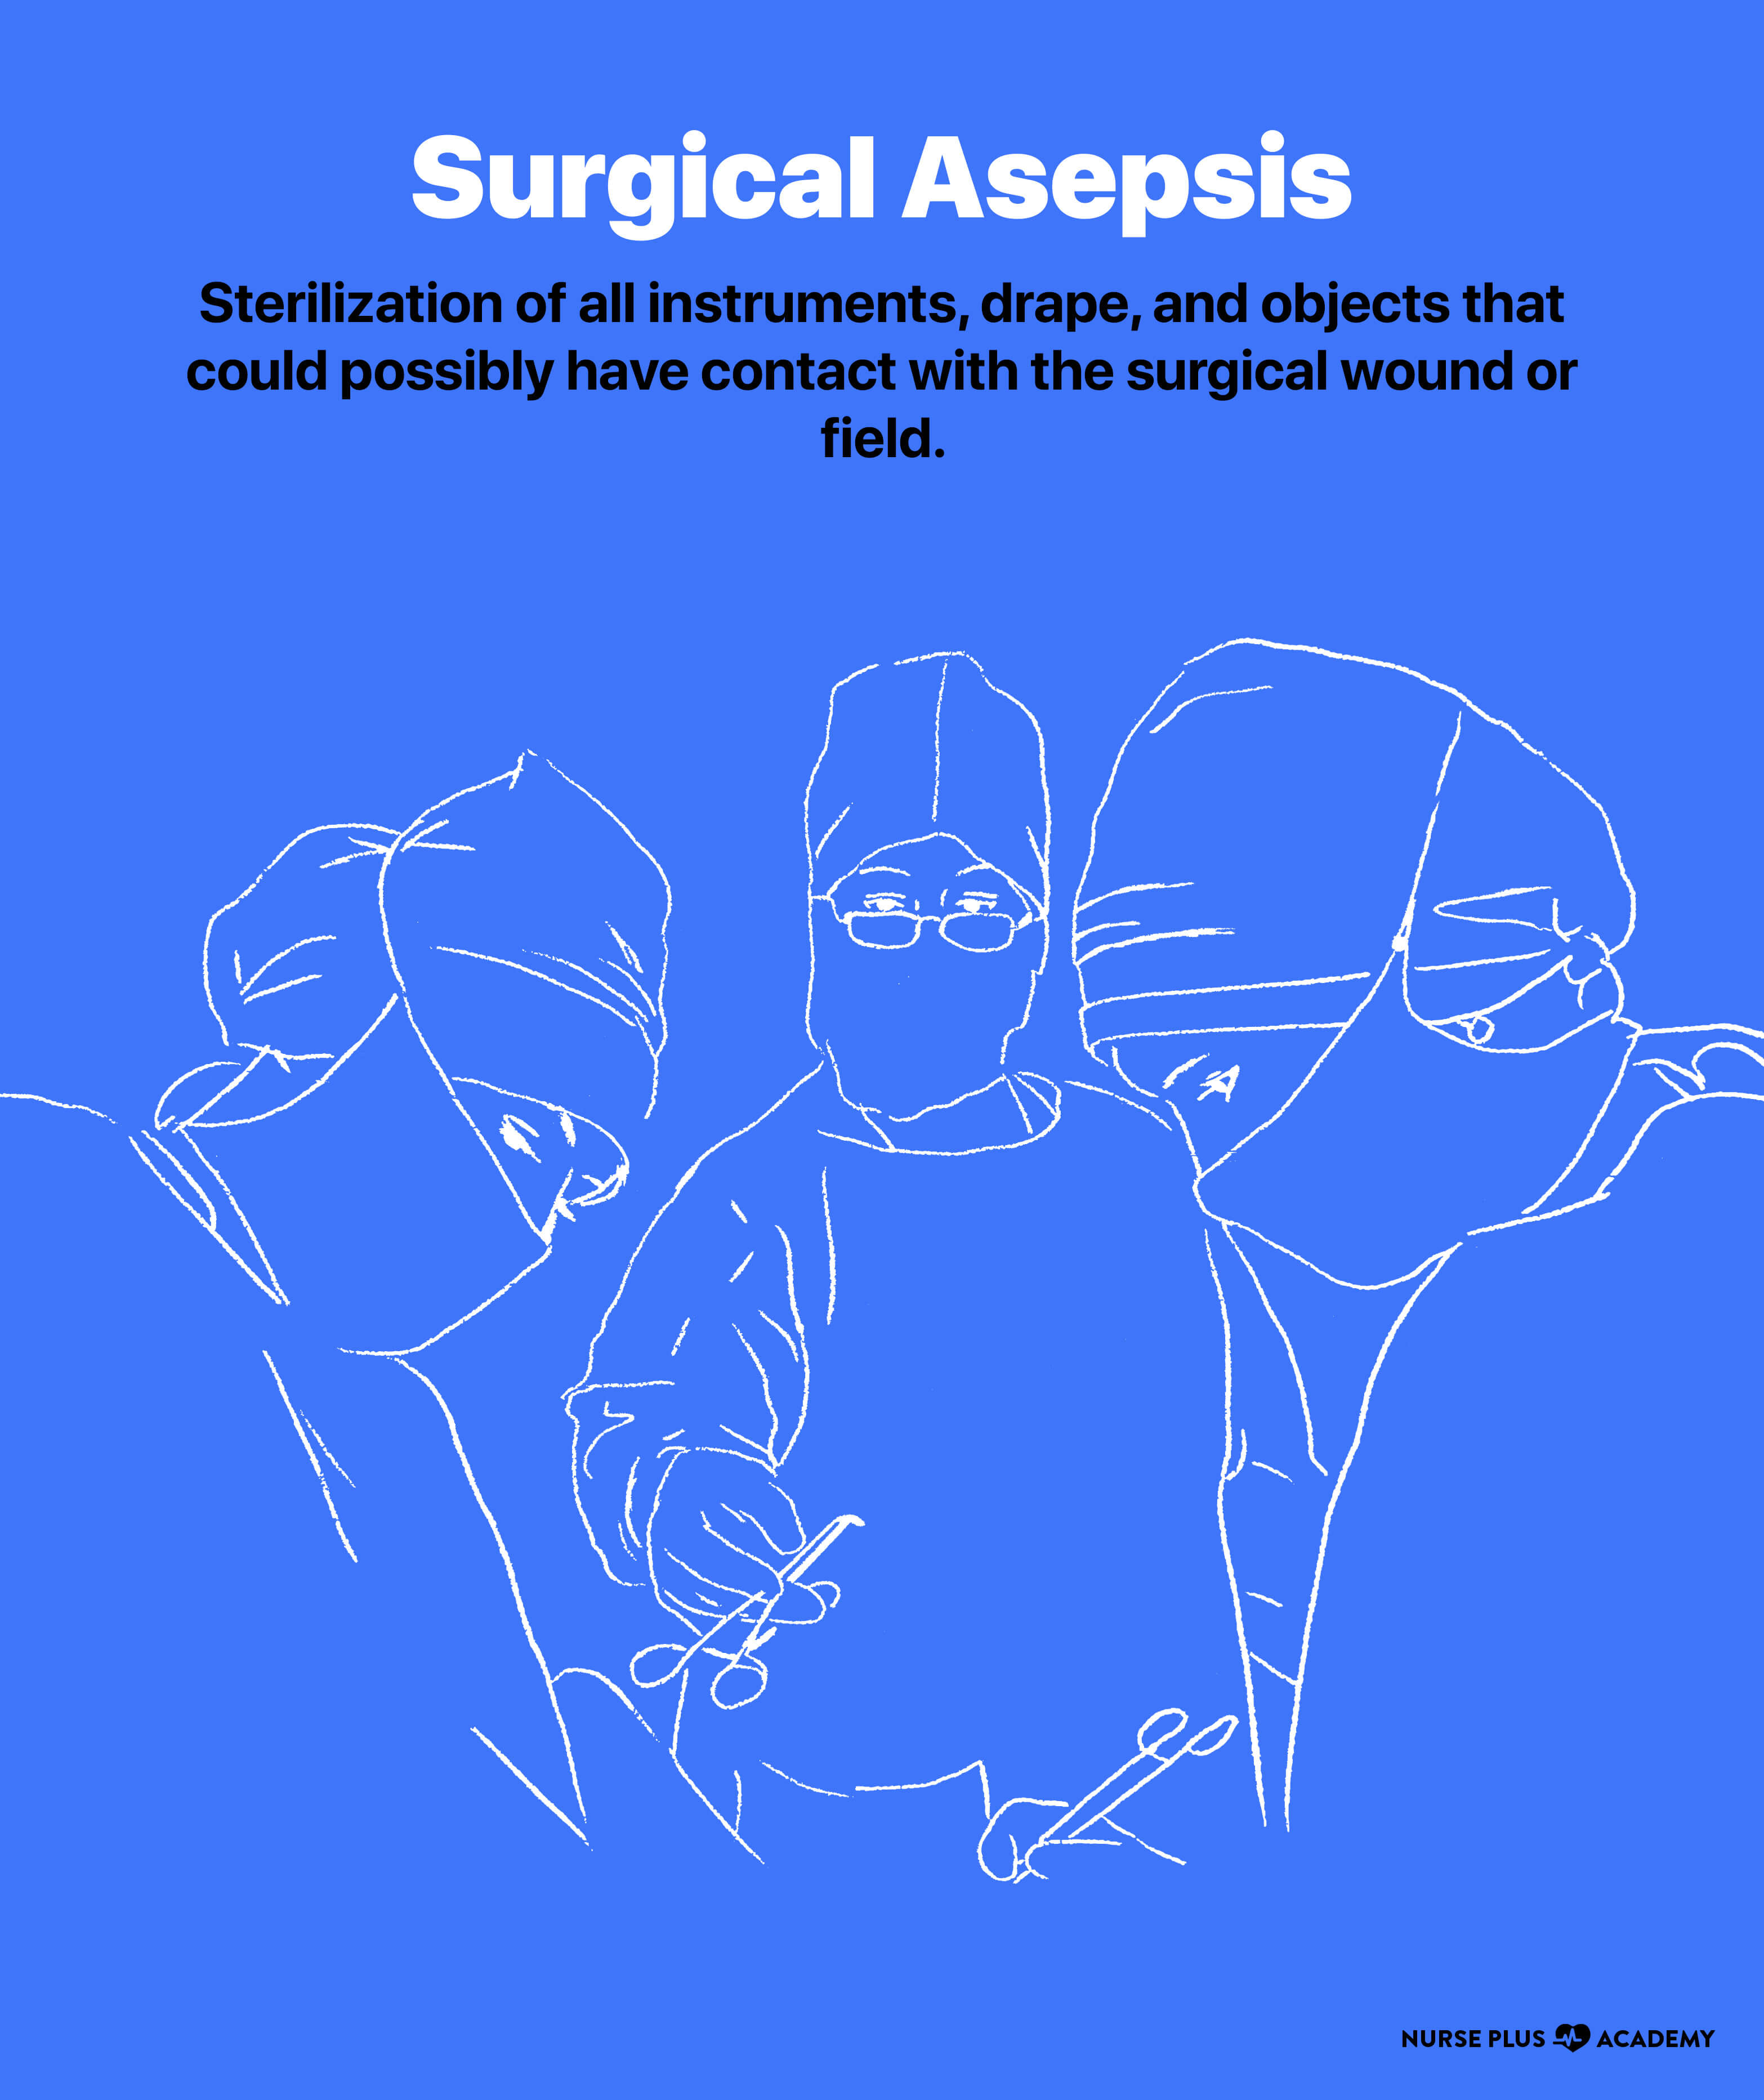 difference between medical and surgical asepsis